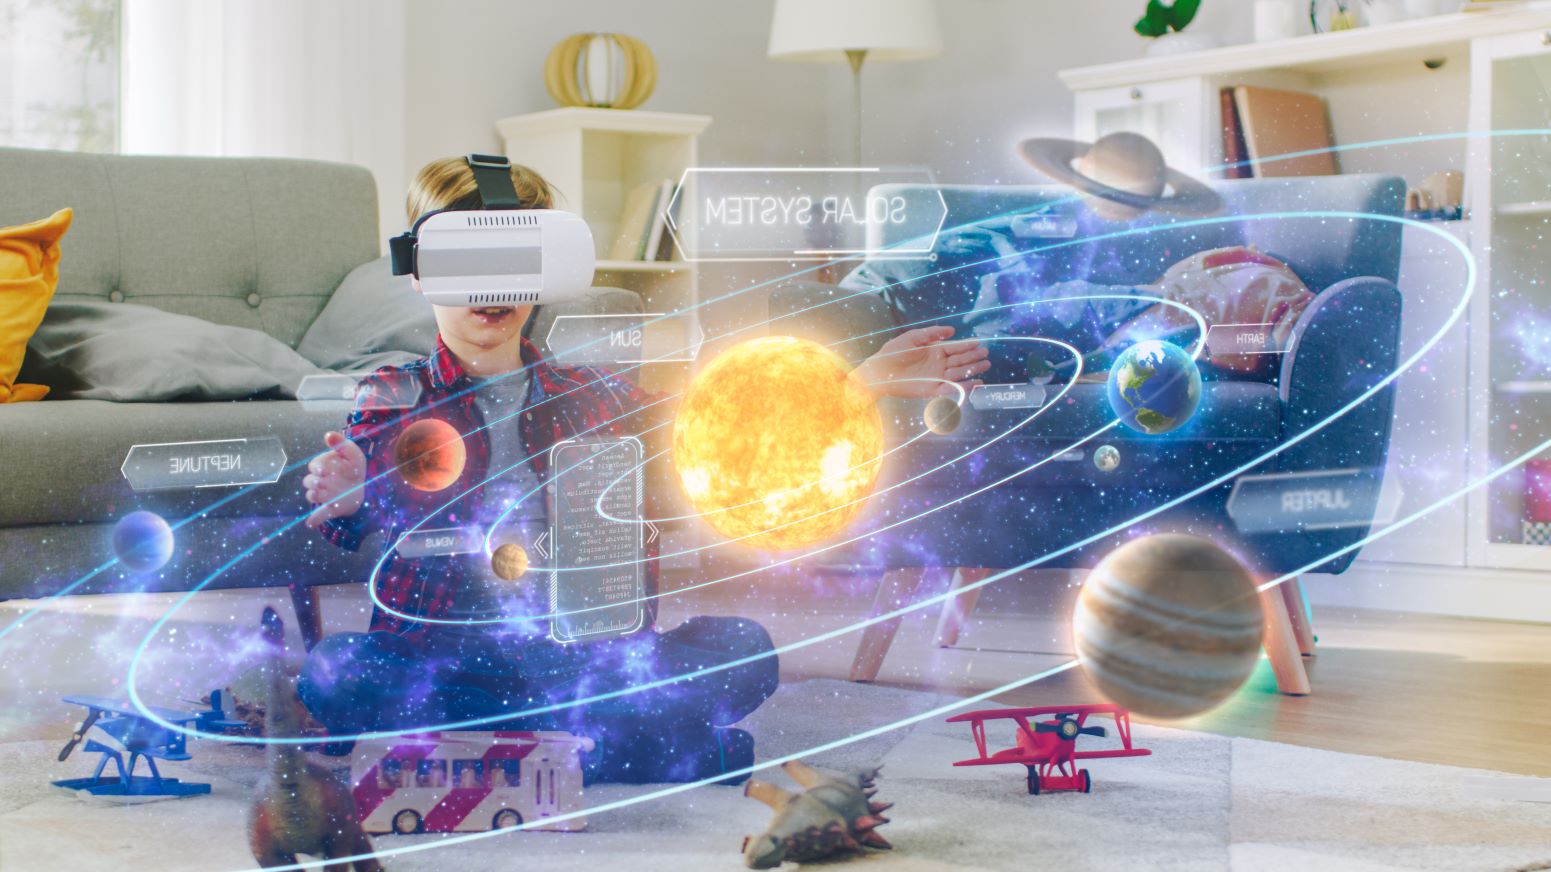 How The Metaverse Augmented Reality Will Change How We Interact